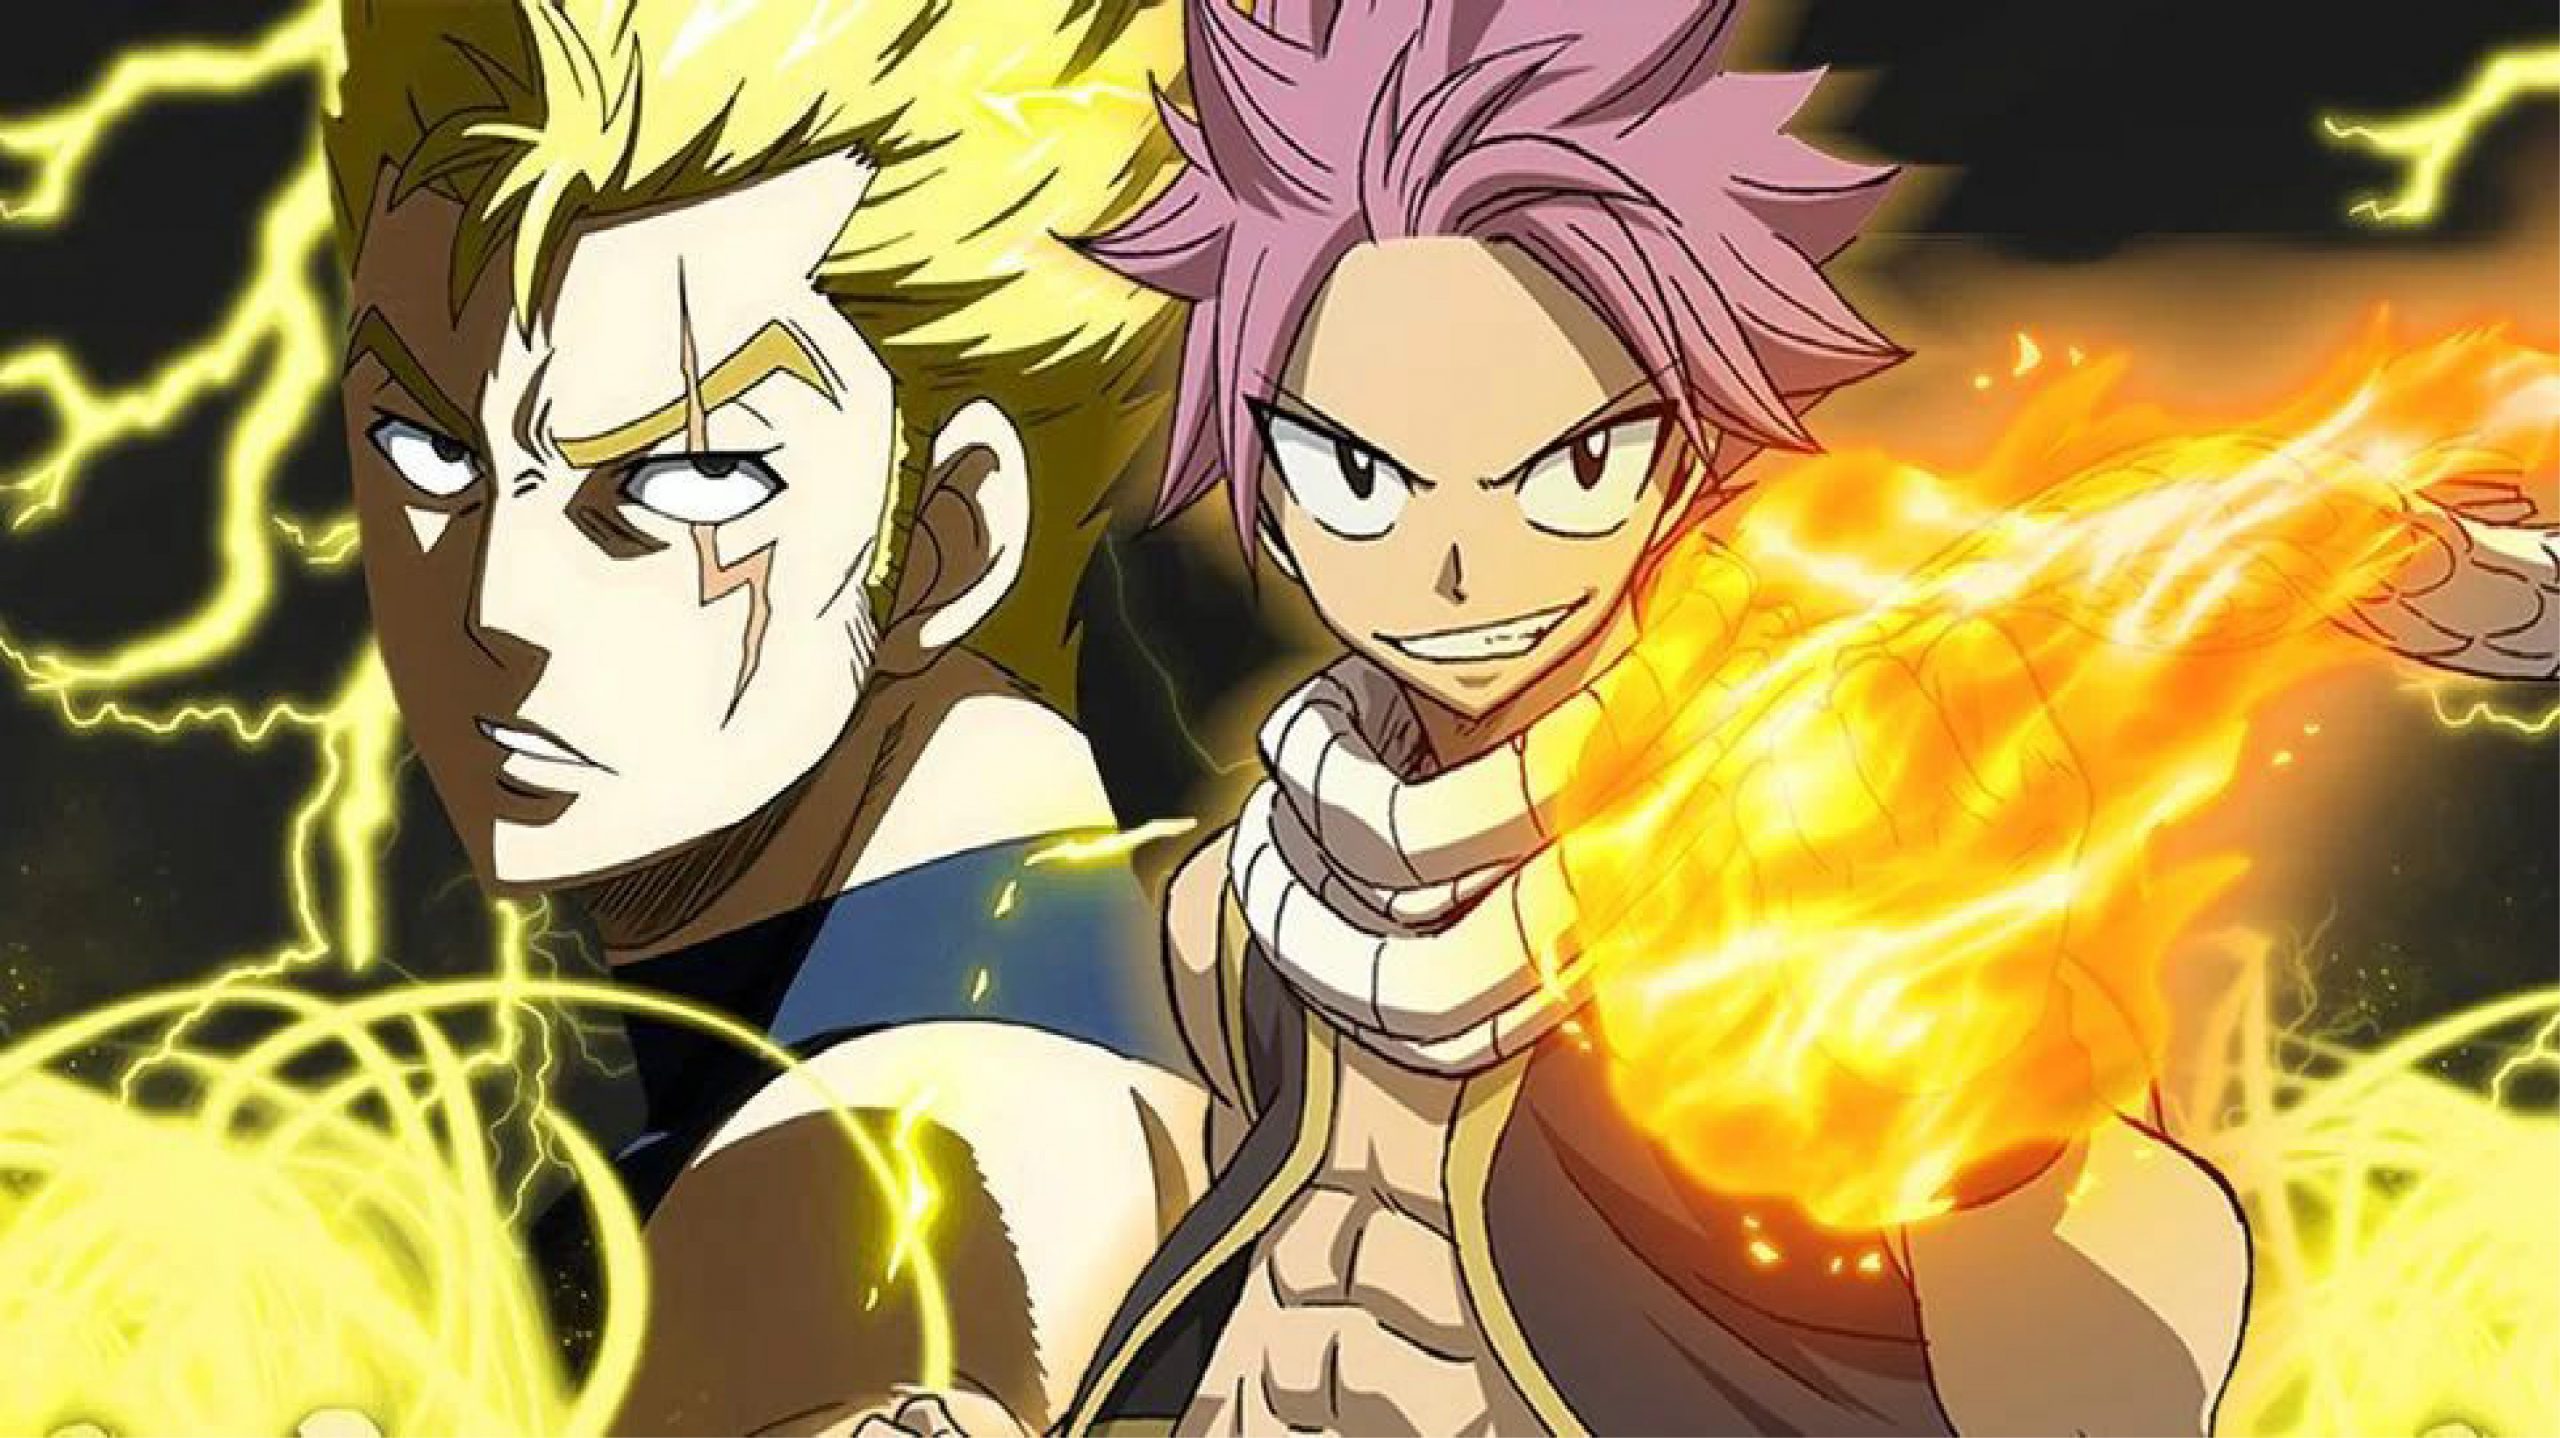 10 Facts about Natsu Dragneel, the Dragon Slayer with Fire Magic from Fairy  Tail